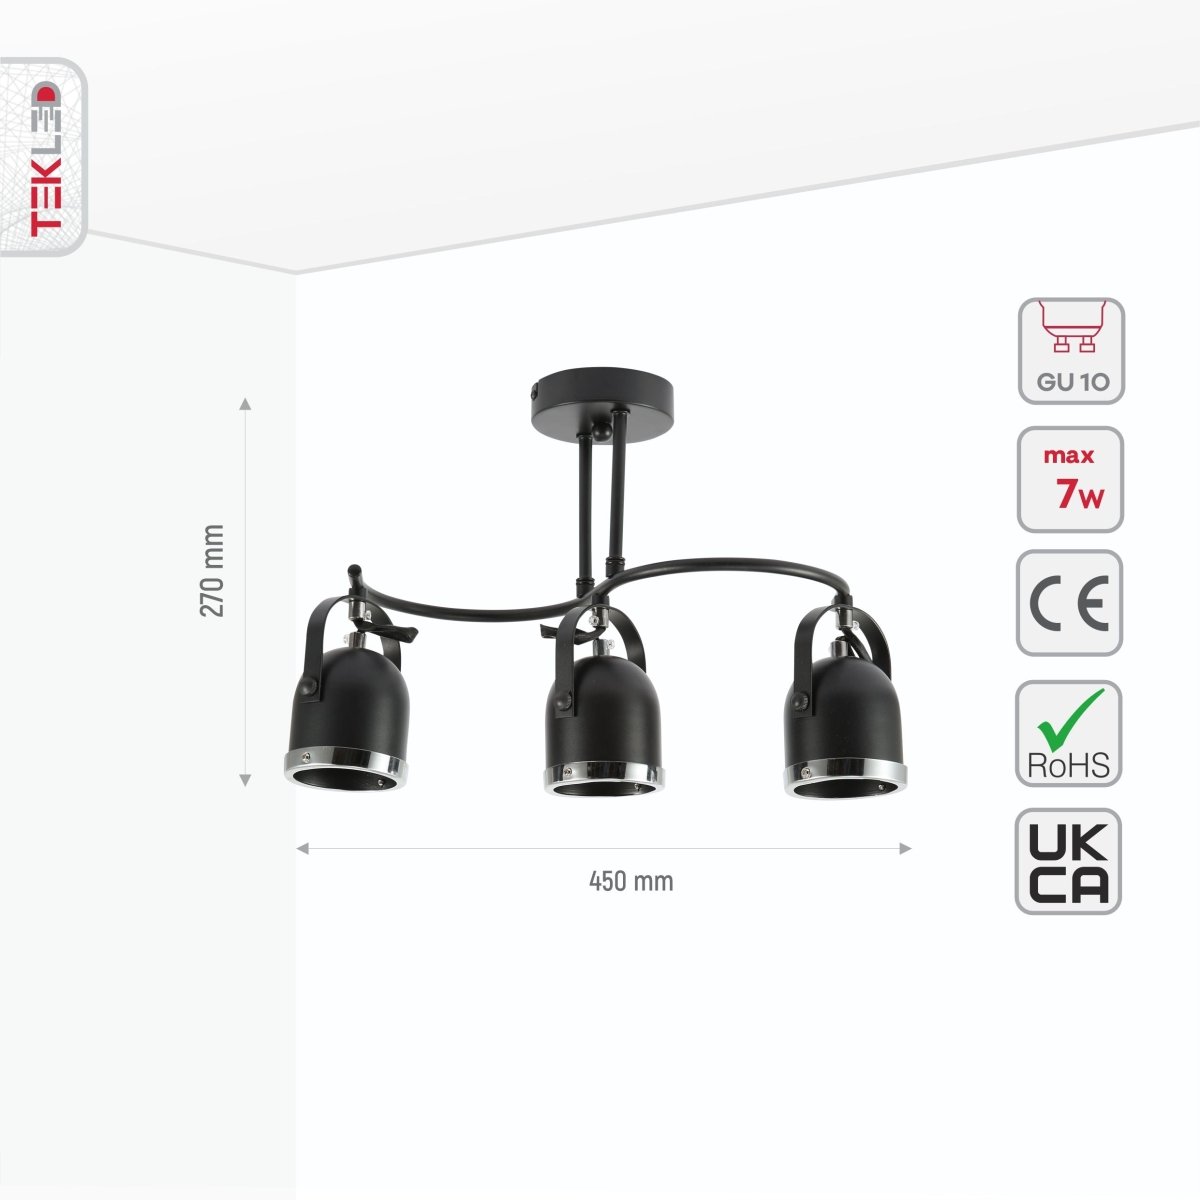 Size and specs of 3-way Spotlight Black and Chrome S shape with GU10 Fitting | TEKLED 172-03106